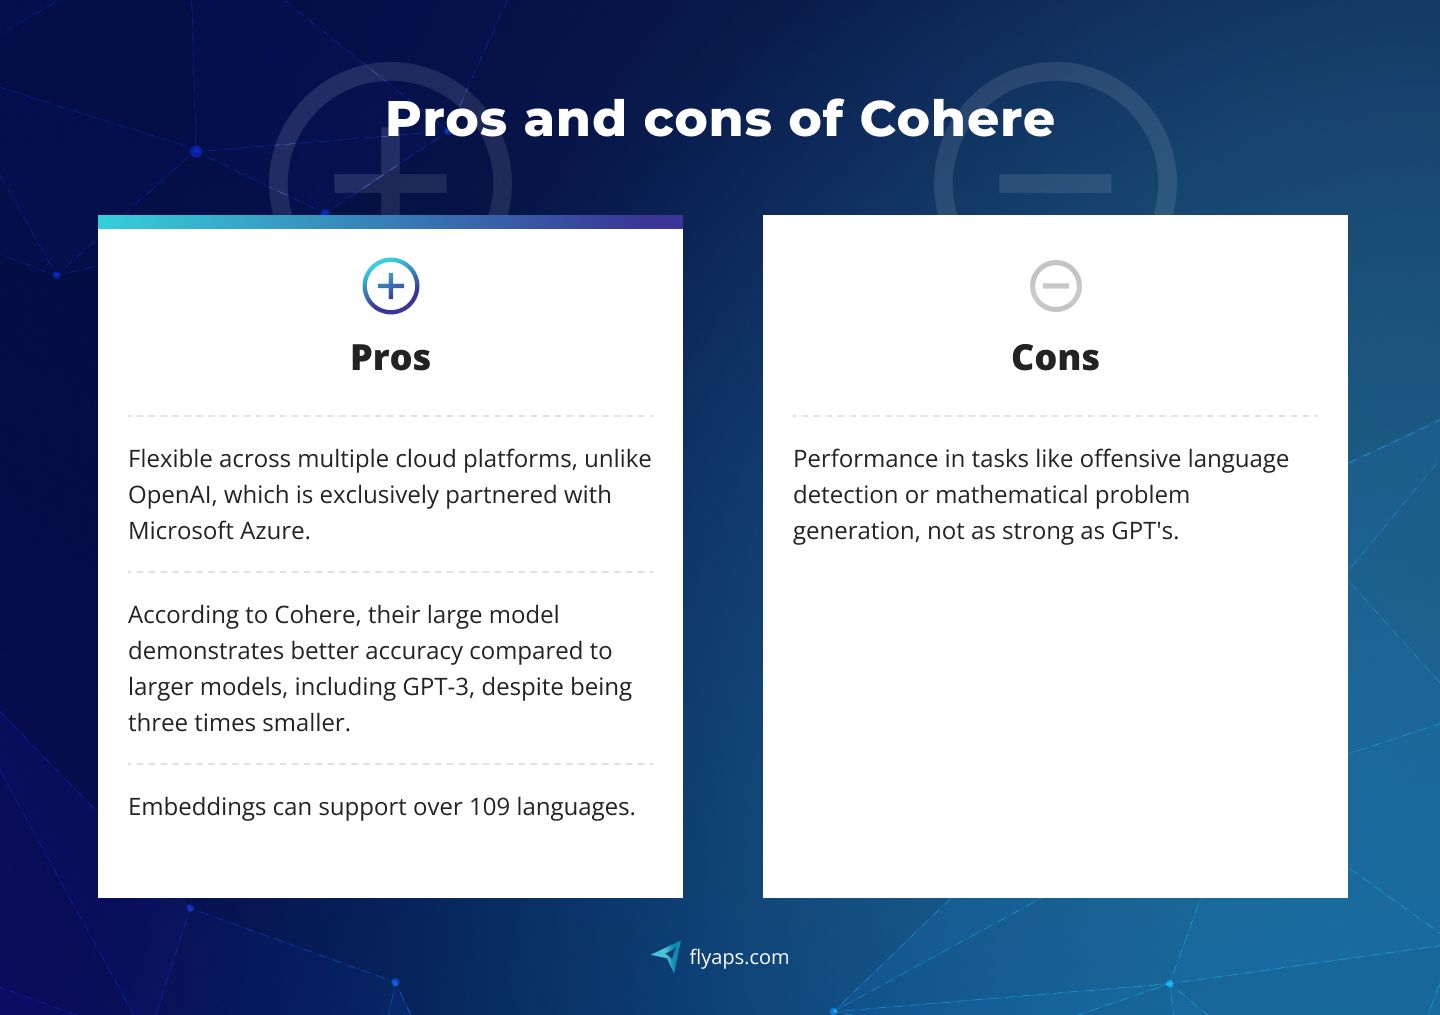 Pros and cons of Cohere